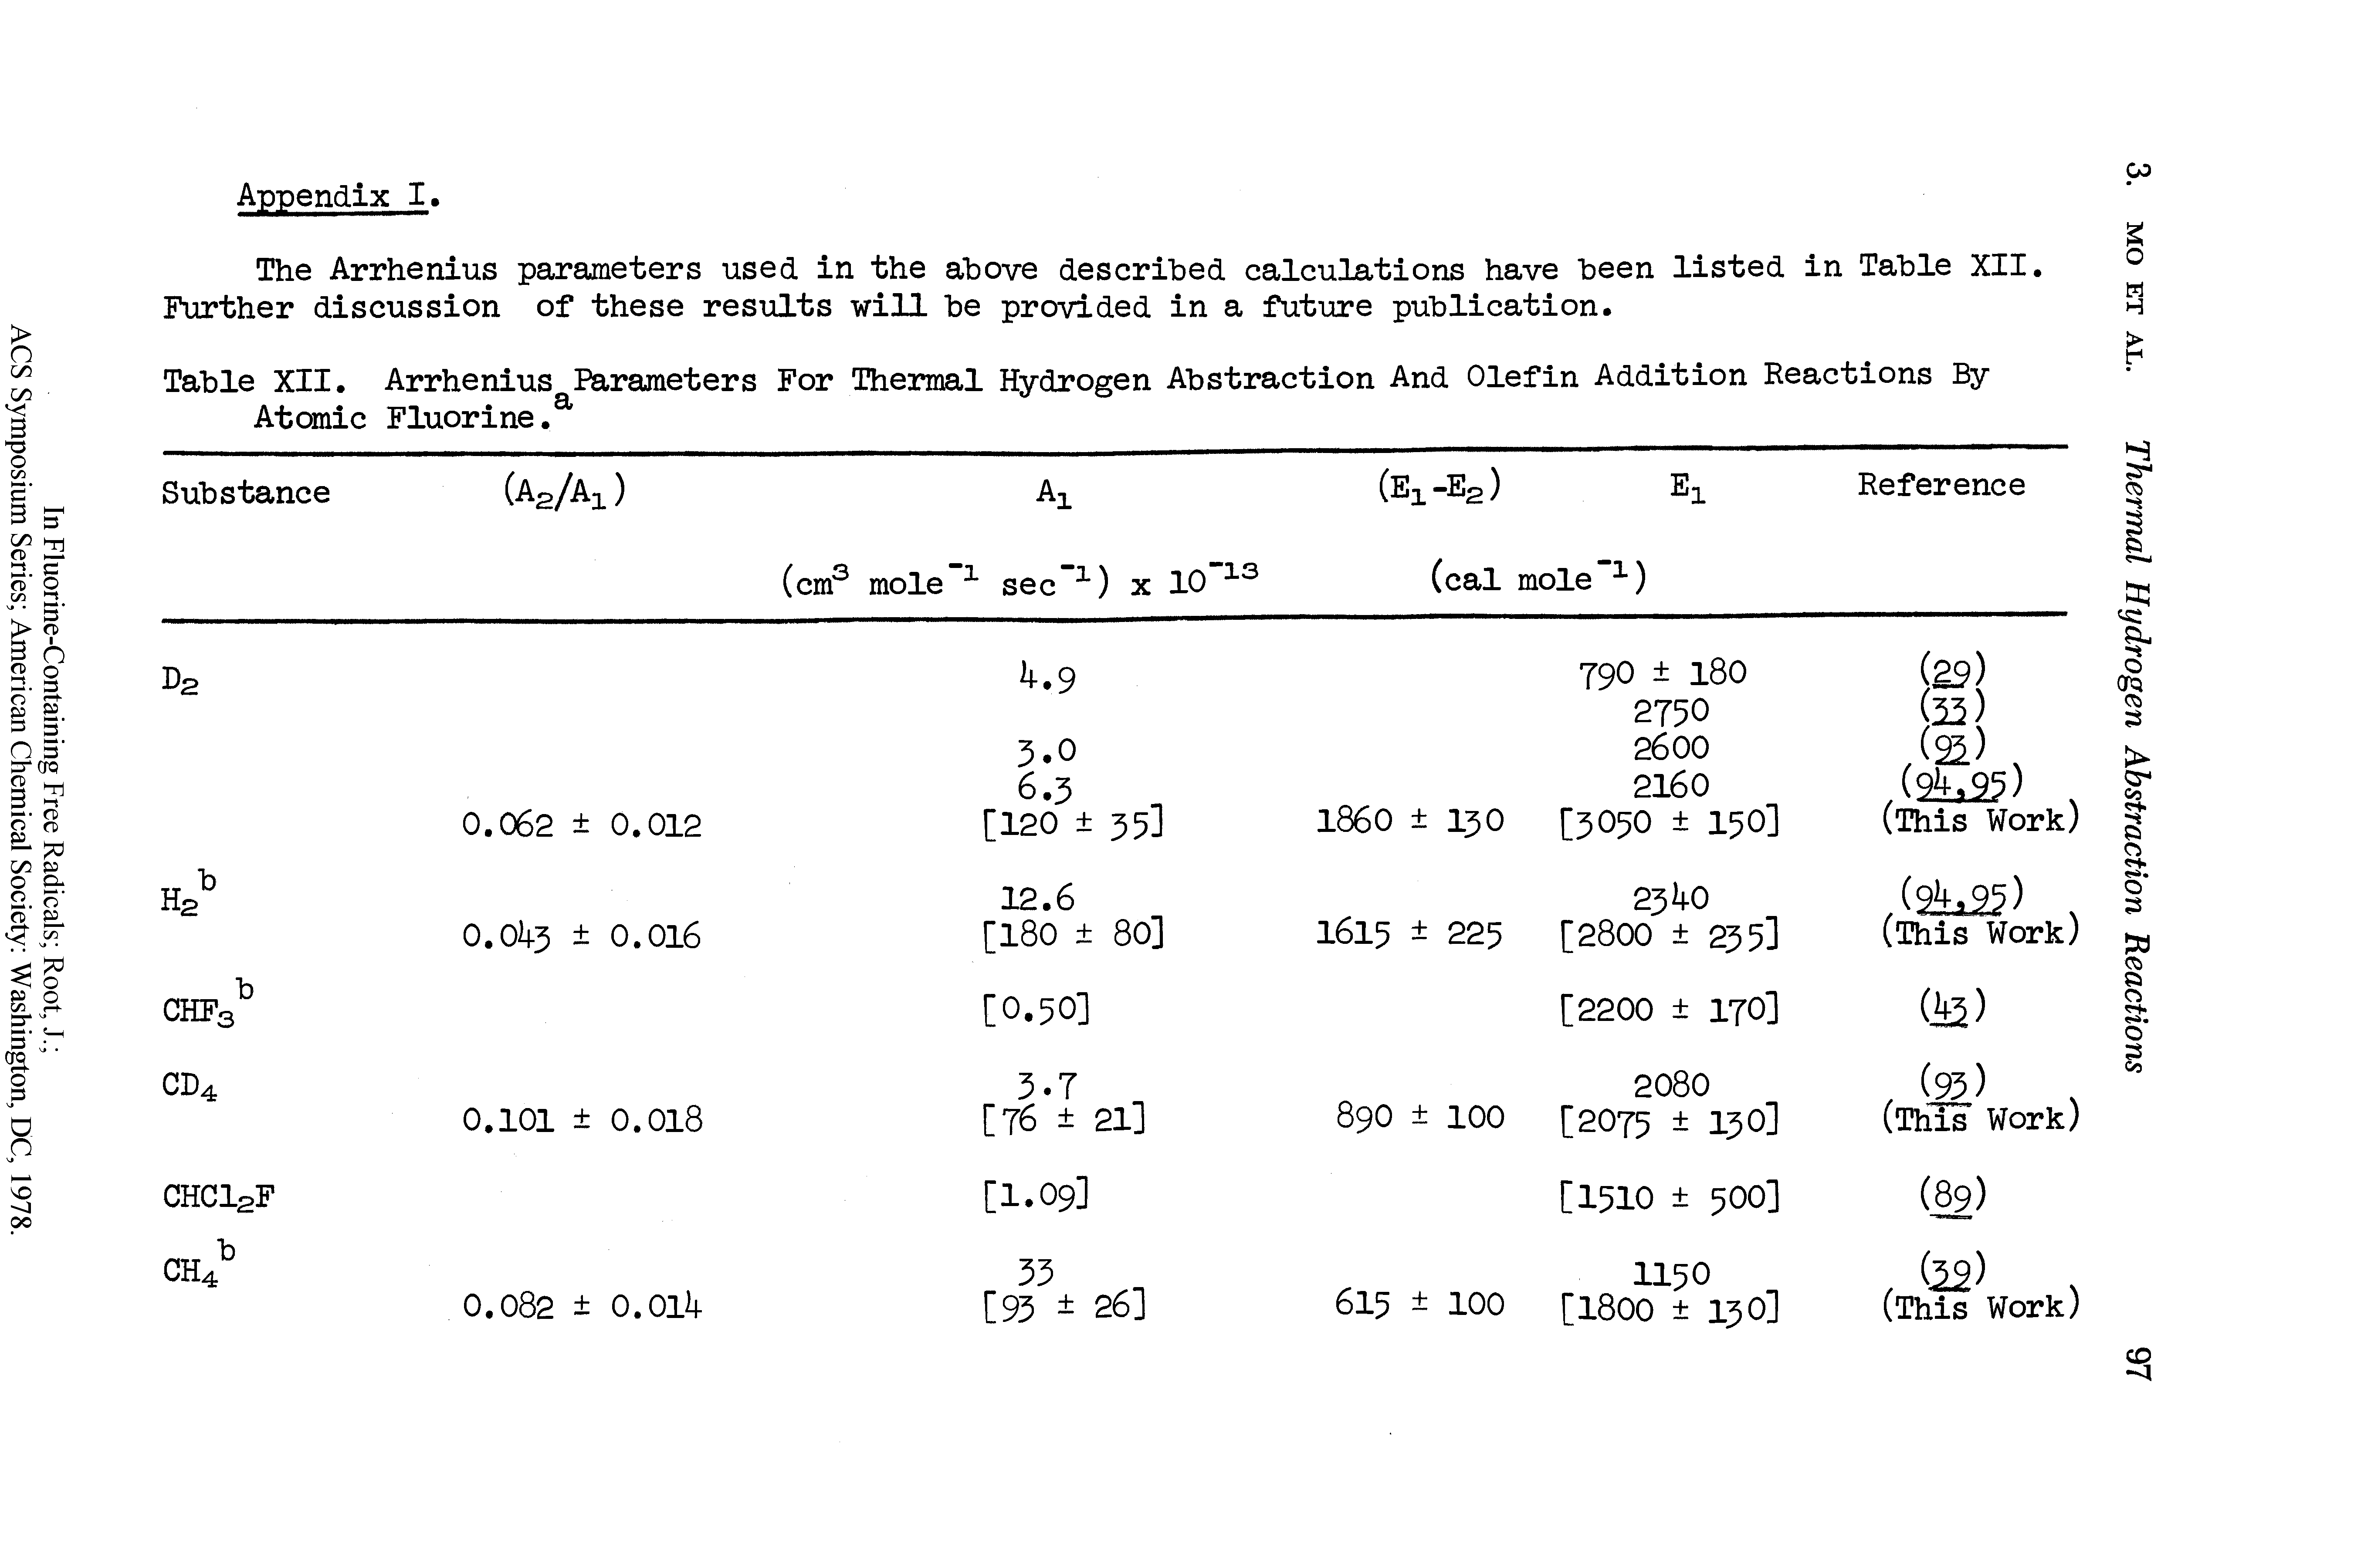 Table XII. Arrhenius Parameters For Thermal Hydrogen Abstraction And Olefin Addition Reactions By Atomic Fluorine.